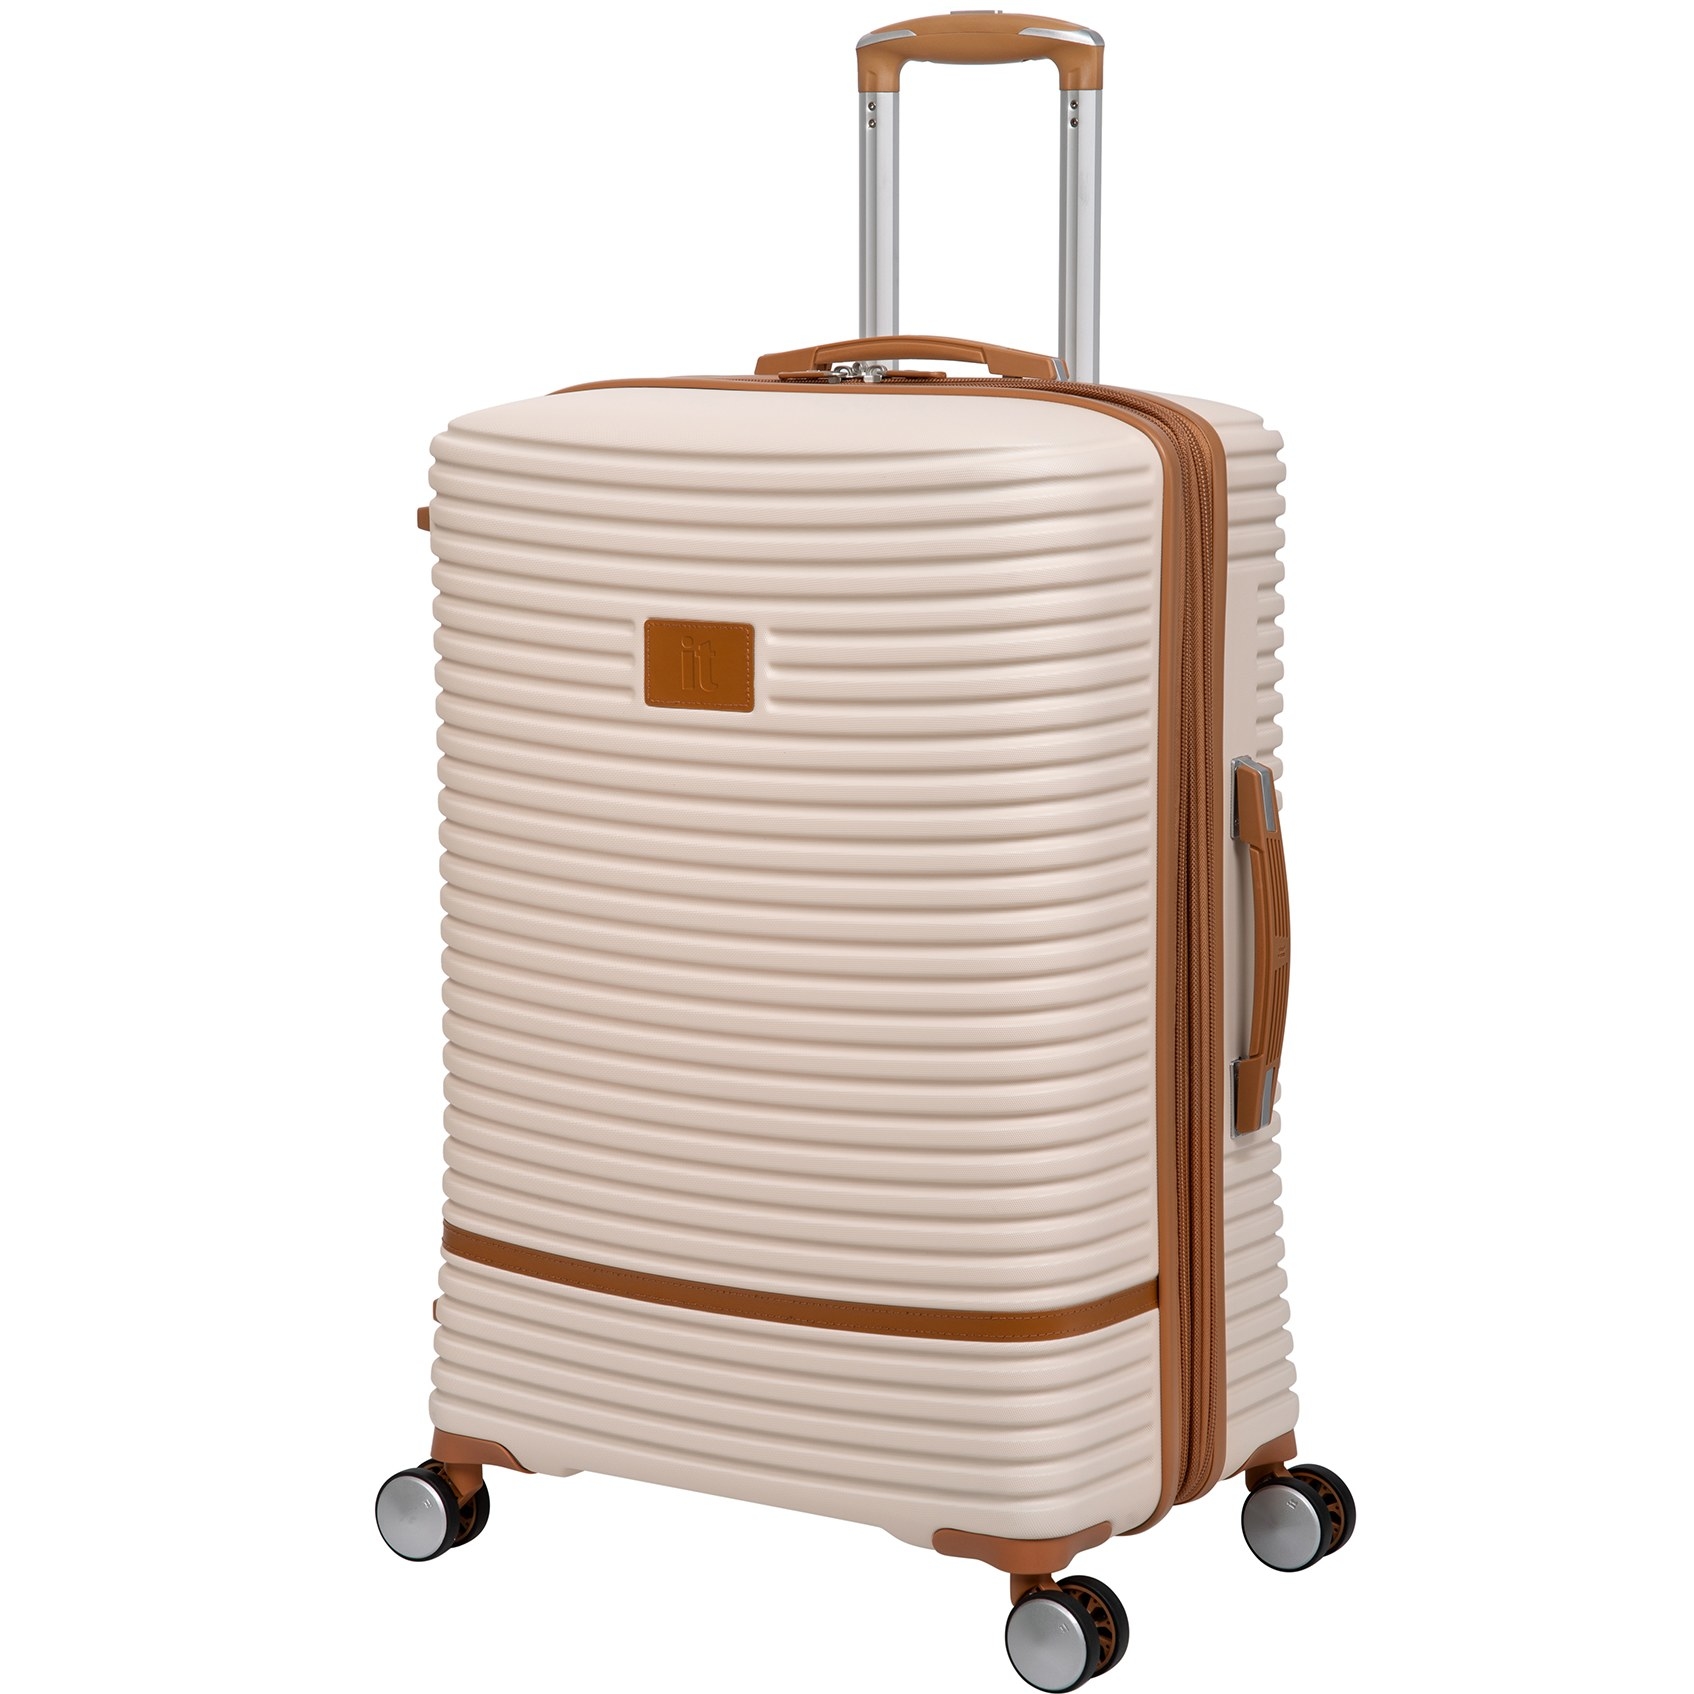 An image of a classy ribbed carry-on bag with an eight wheel roller system plus top and side handles